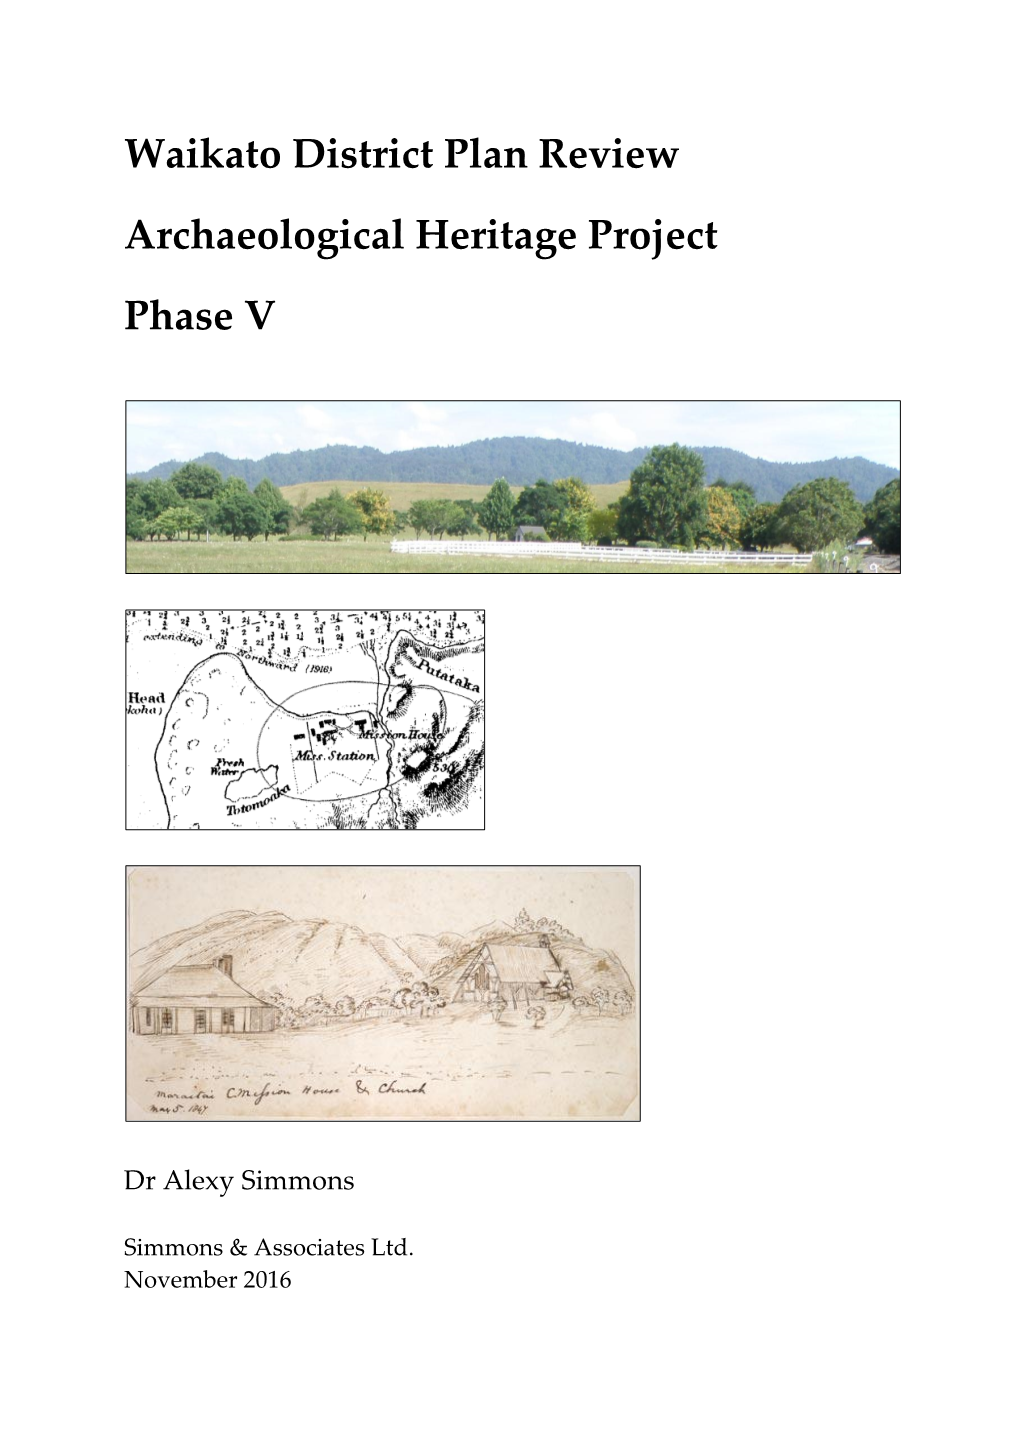 Waikato District Plan Review Archaeological Heritage Project Phase V